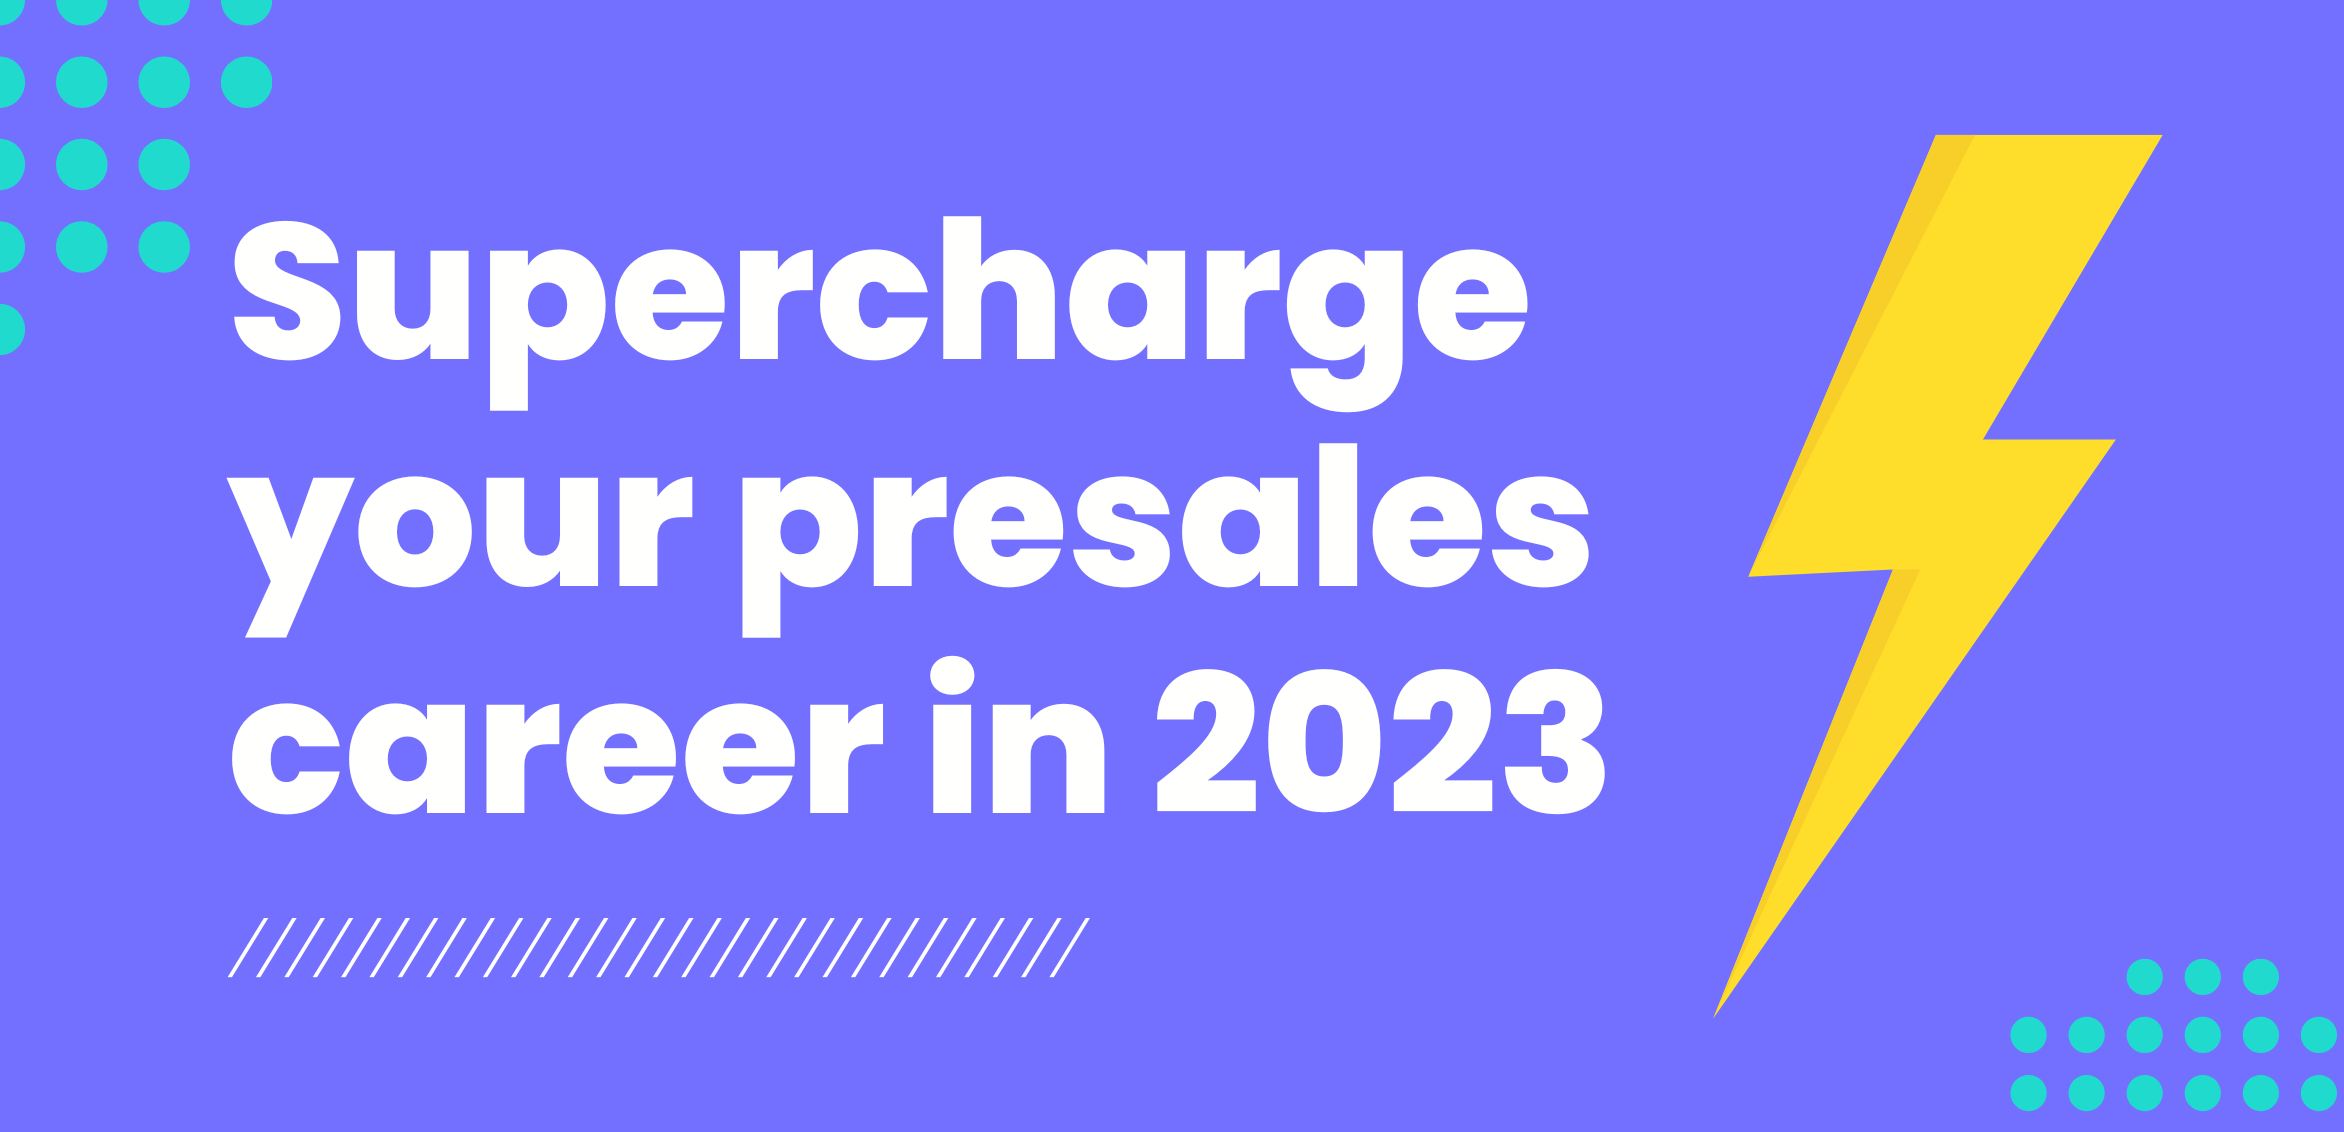 Blog post - Supercharge your presales career in 2023: 3 tips from top SEs